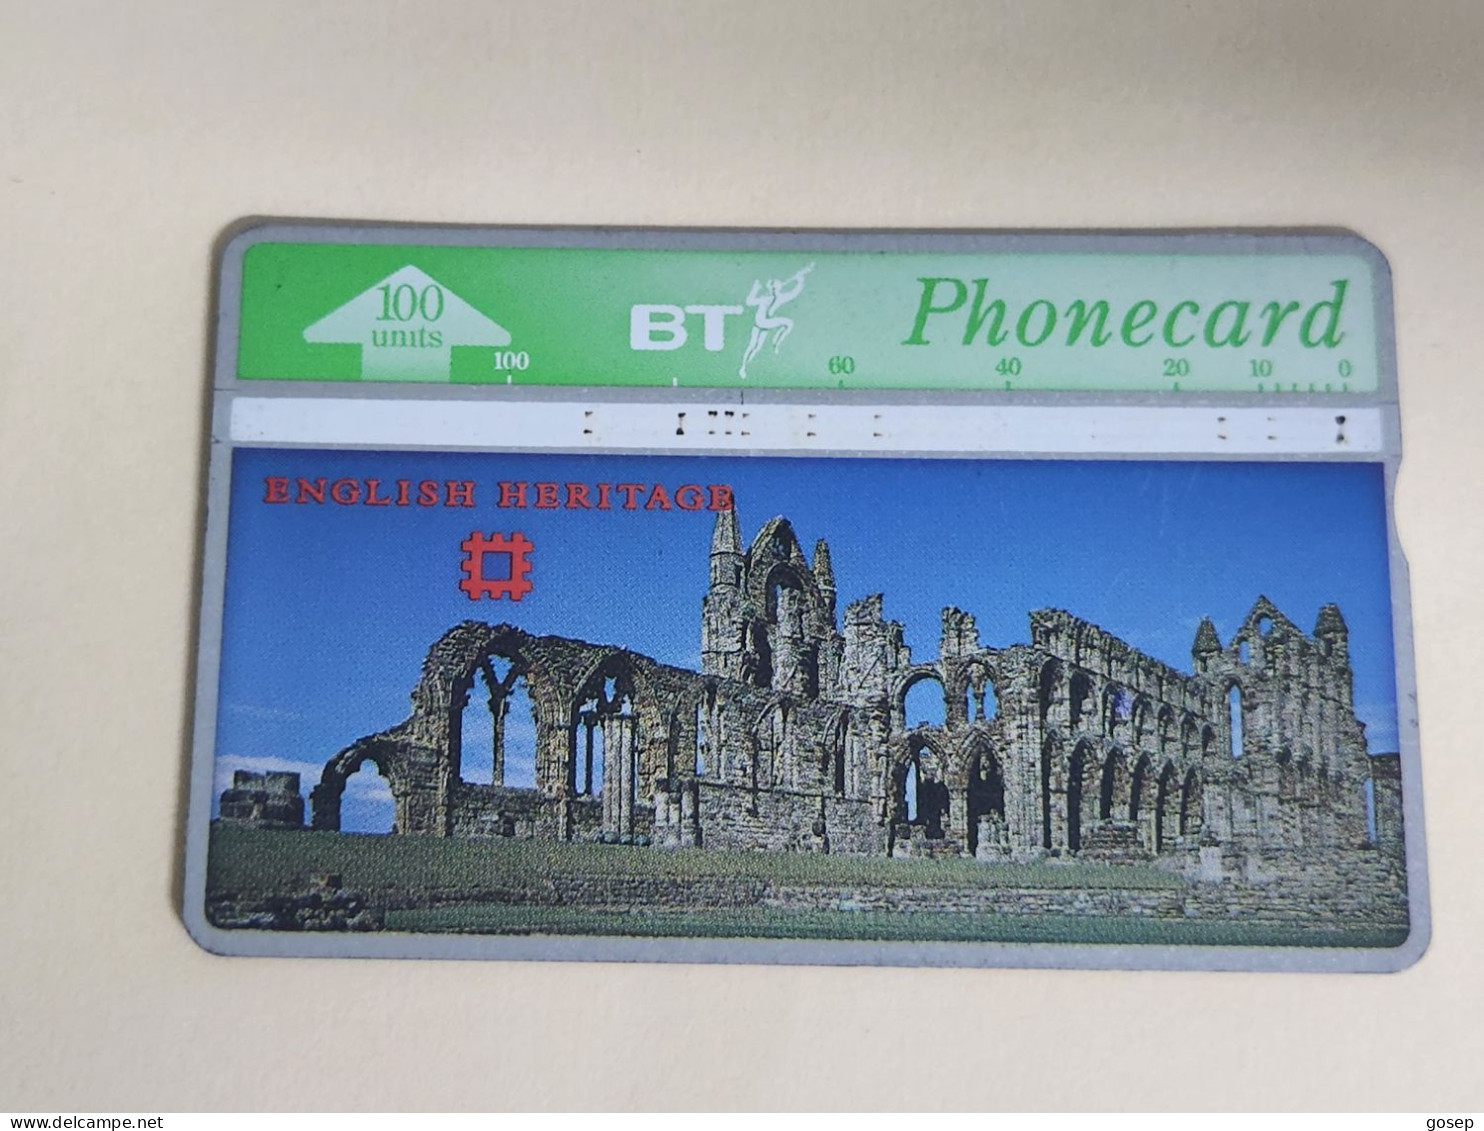 United Kingdom-(BTA122)-HERITAGE-Whitby Abbey-(216)(100units)(527H57509)price Cataloge3.00£-used+1card Prepiad Free - BT Advertising Issues